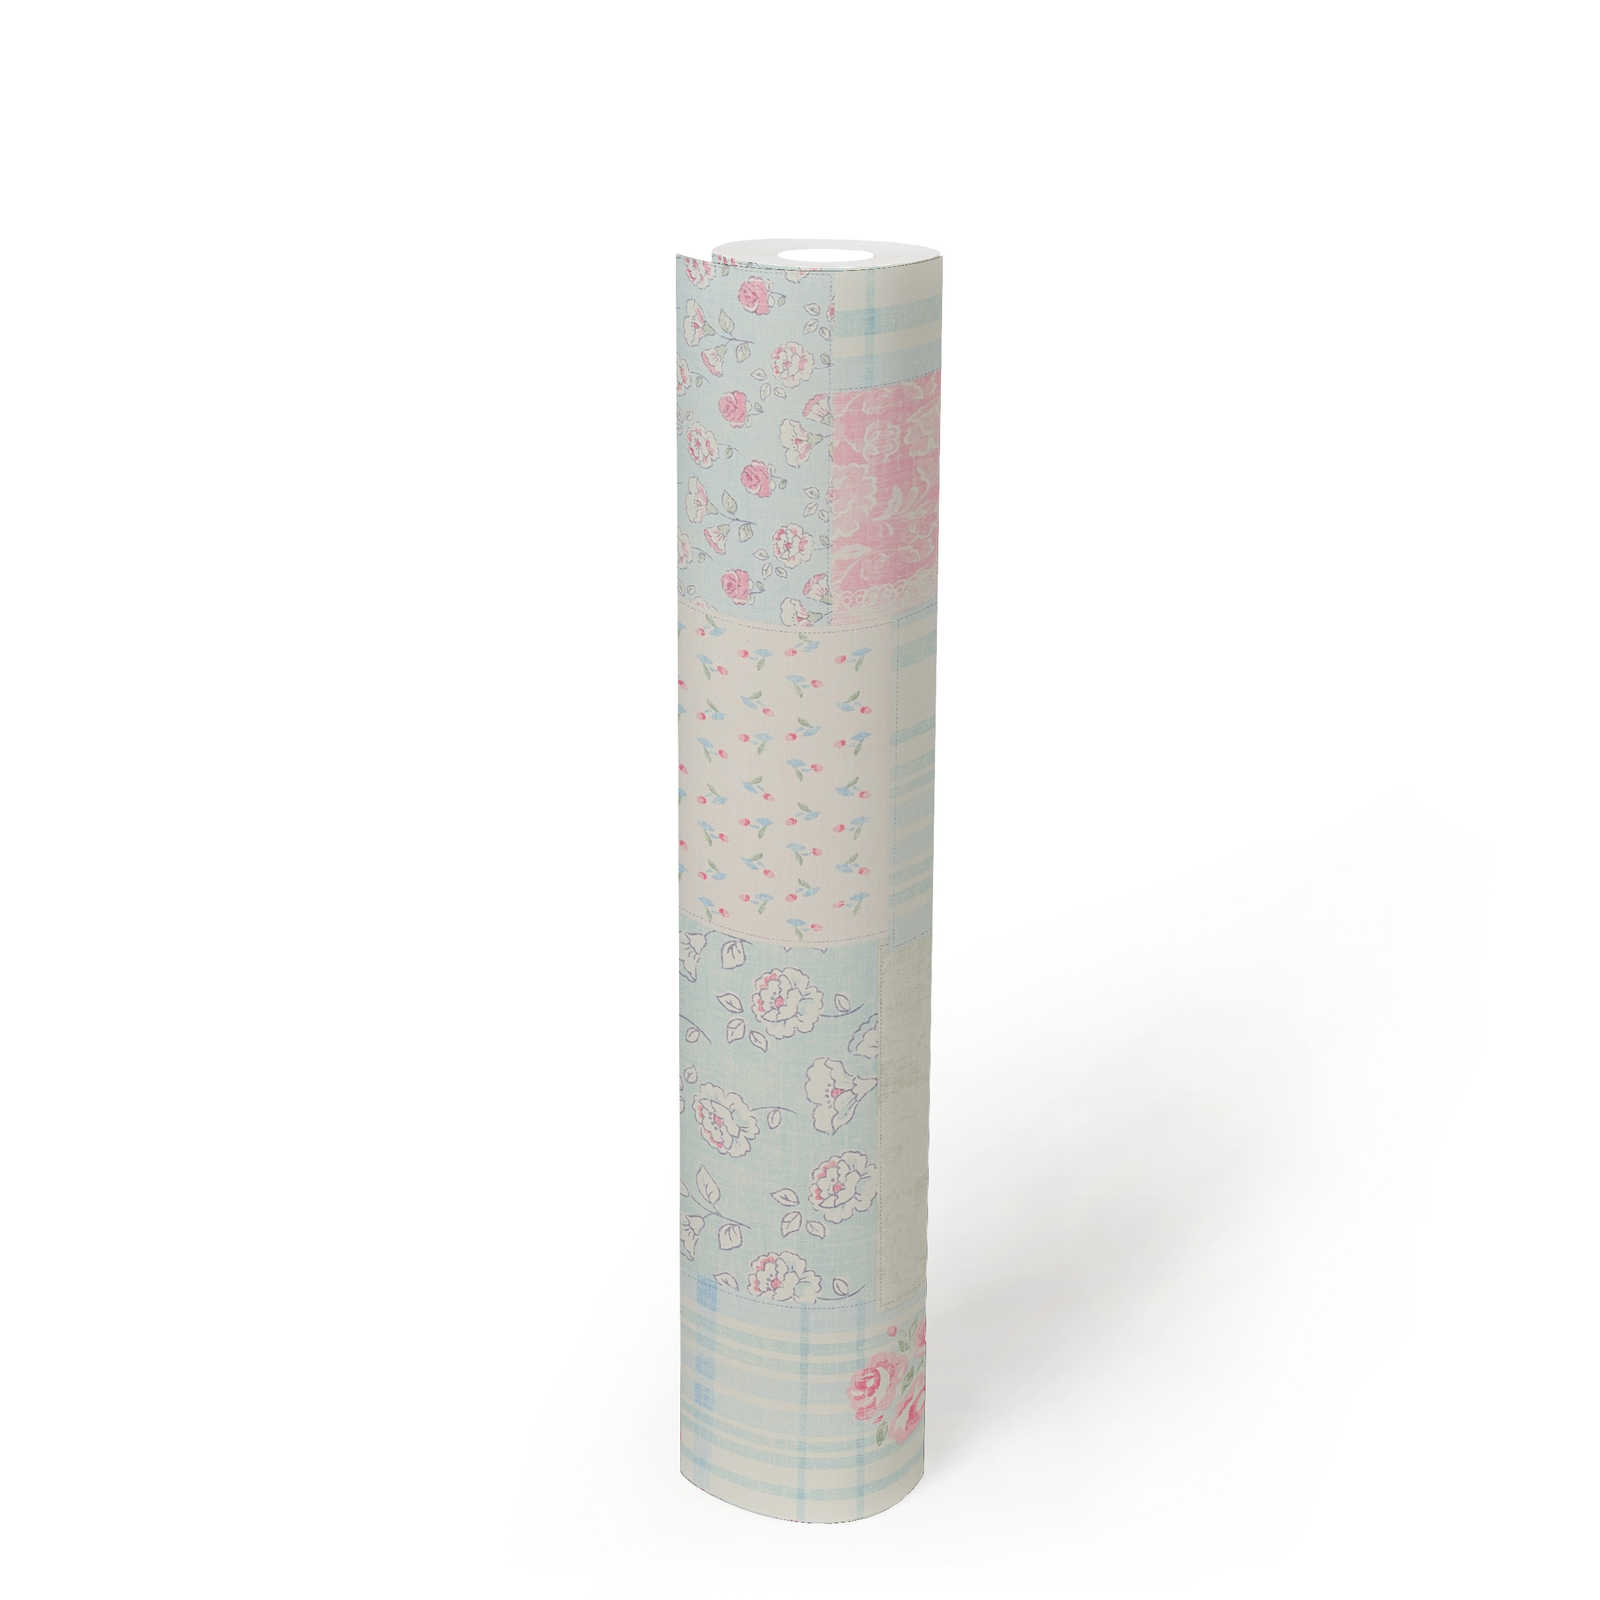             Country style non-woven wallpaper floral - blue, pink, white
        